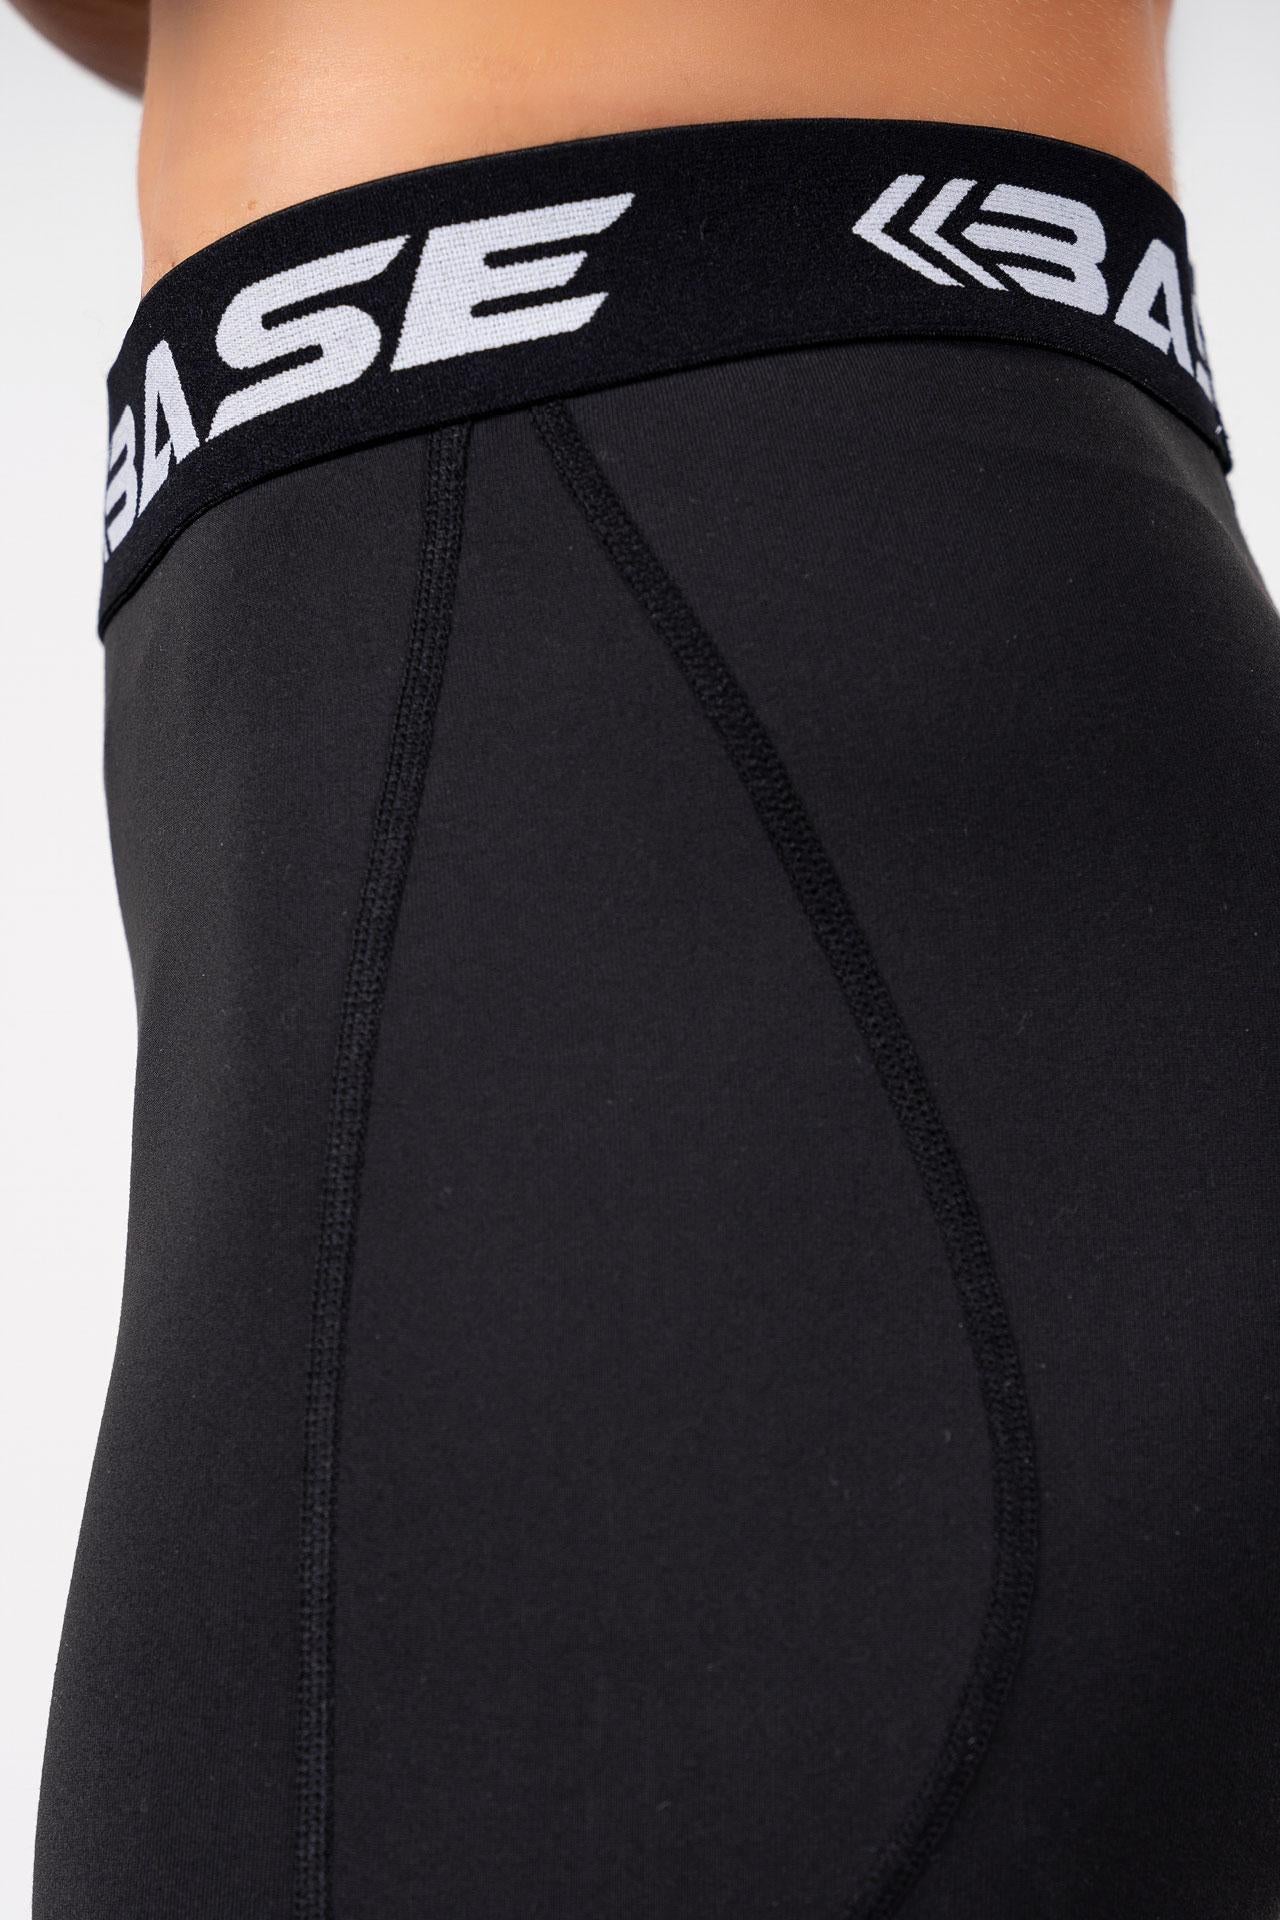 BASE Women's Recovery Tights - Black - Adelaide 36ers